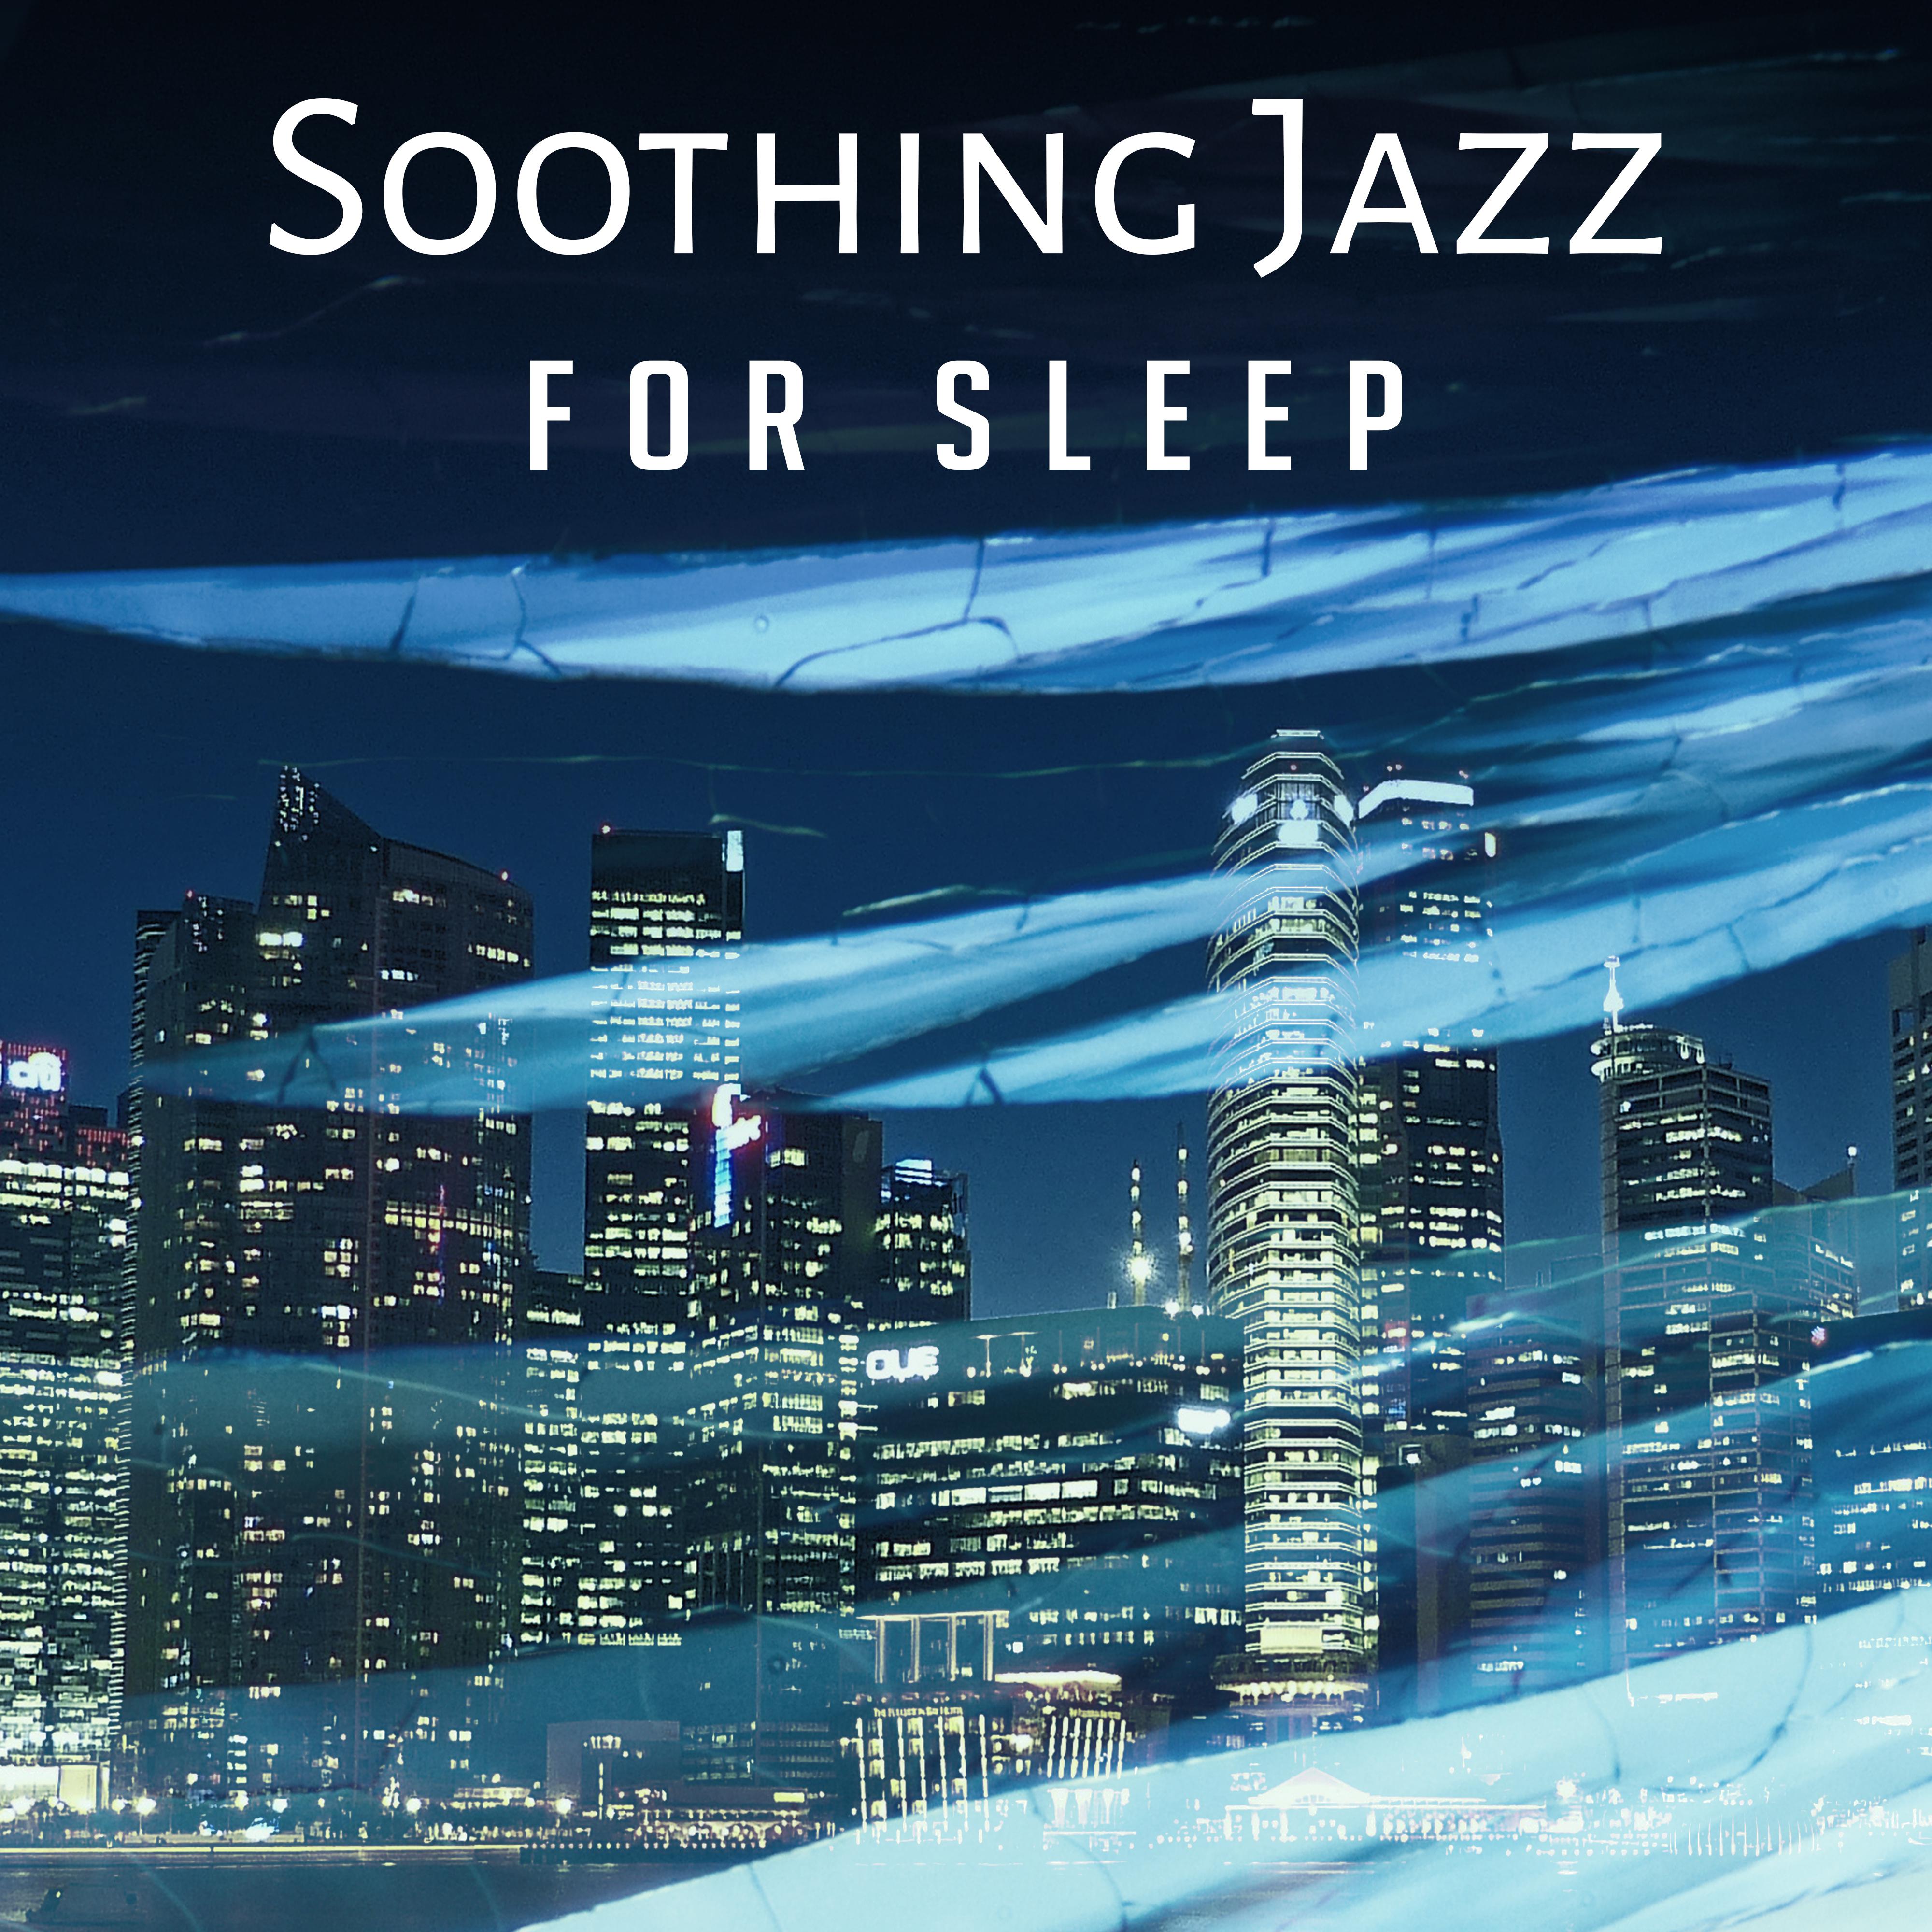 Soothing Jazz for Sleep – Instrumental Melodies to Bed, Mellow Jazz, Sleep Music, Lullaby at Goodnight, Relaxation, Smooth Jazz